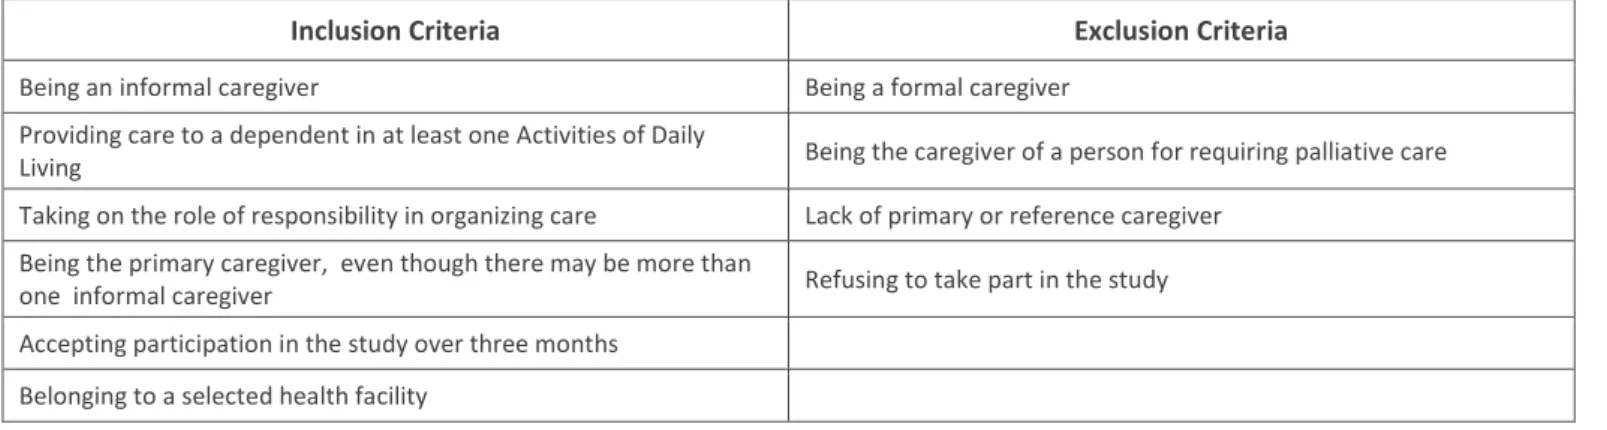 Table 2 - Inclusion and exclusion criteria of the sample 